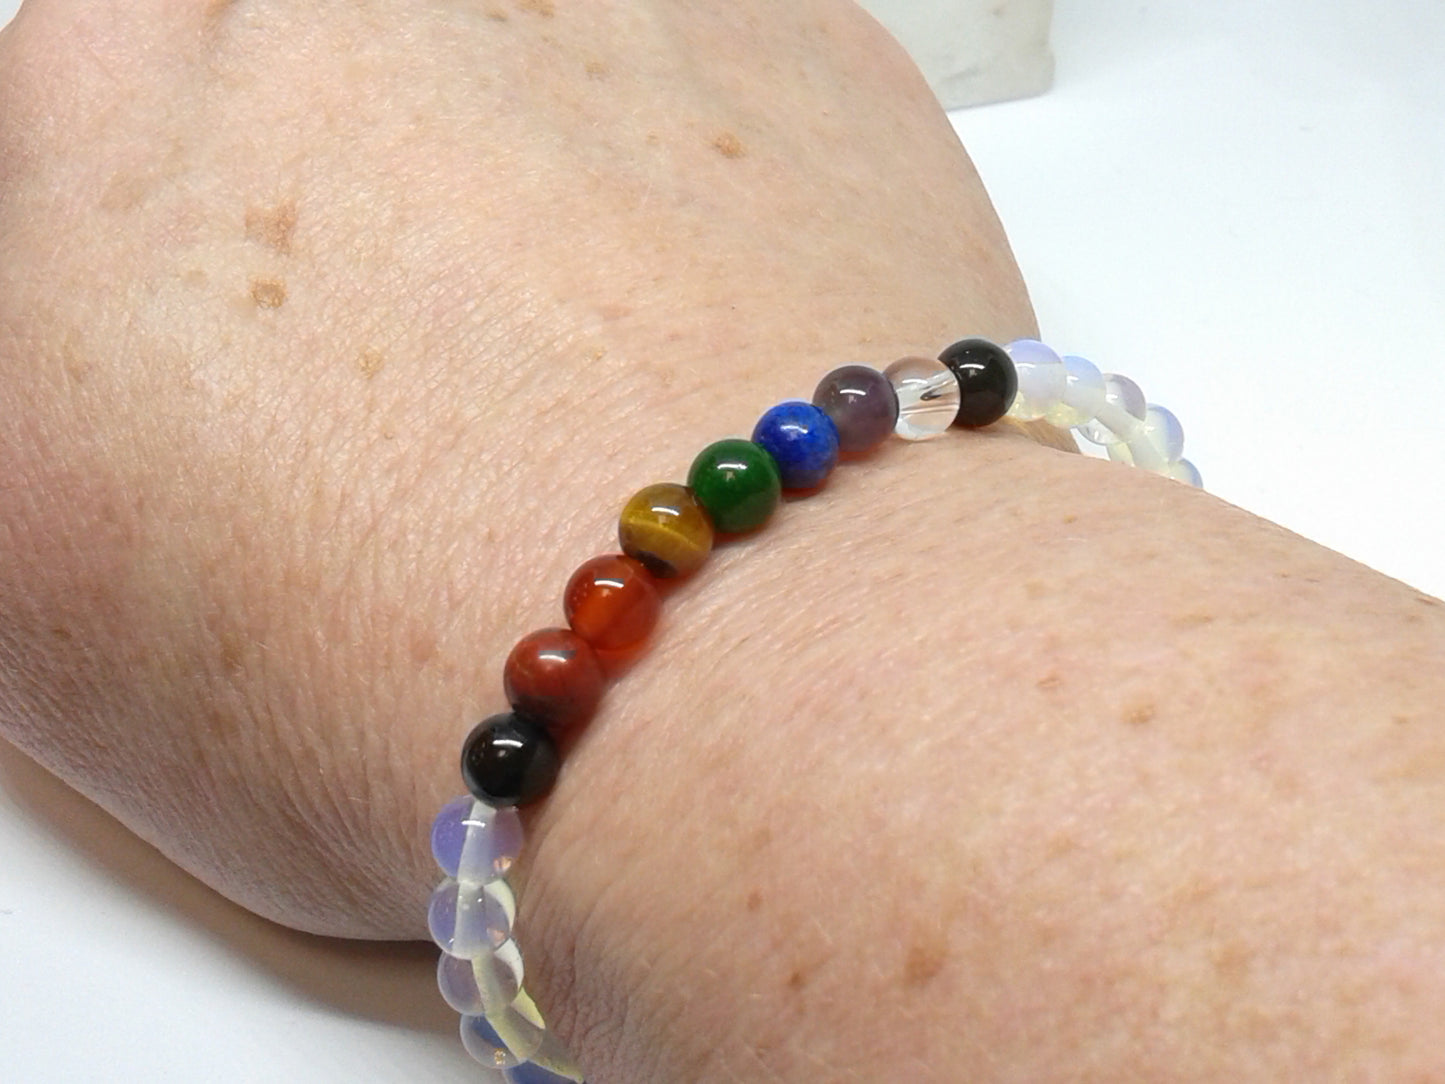 Chakra Bracelet - 1 sequence Surrounded by Opalite 6 mm beads